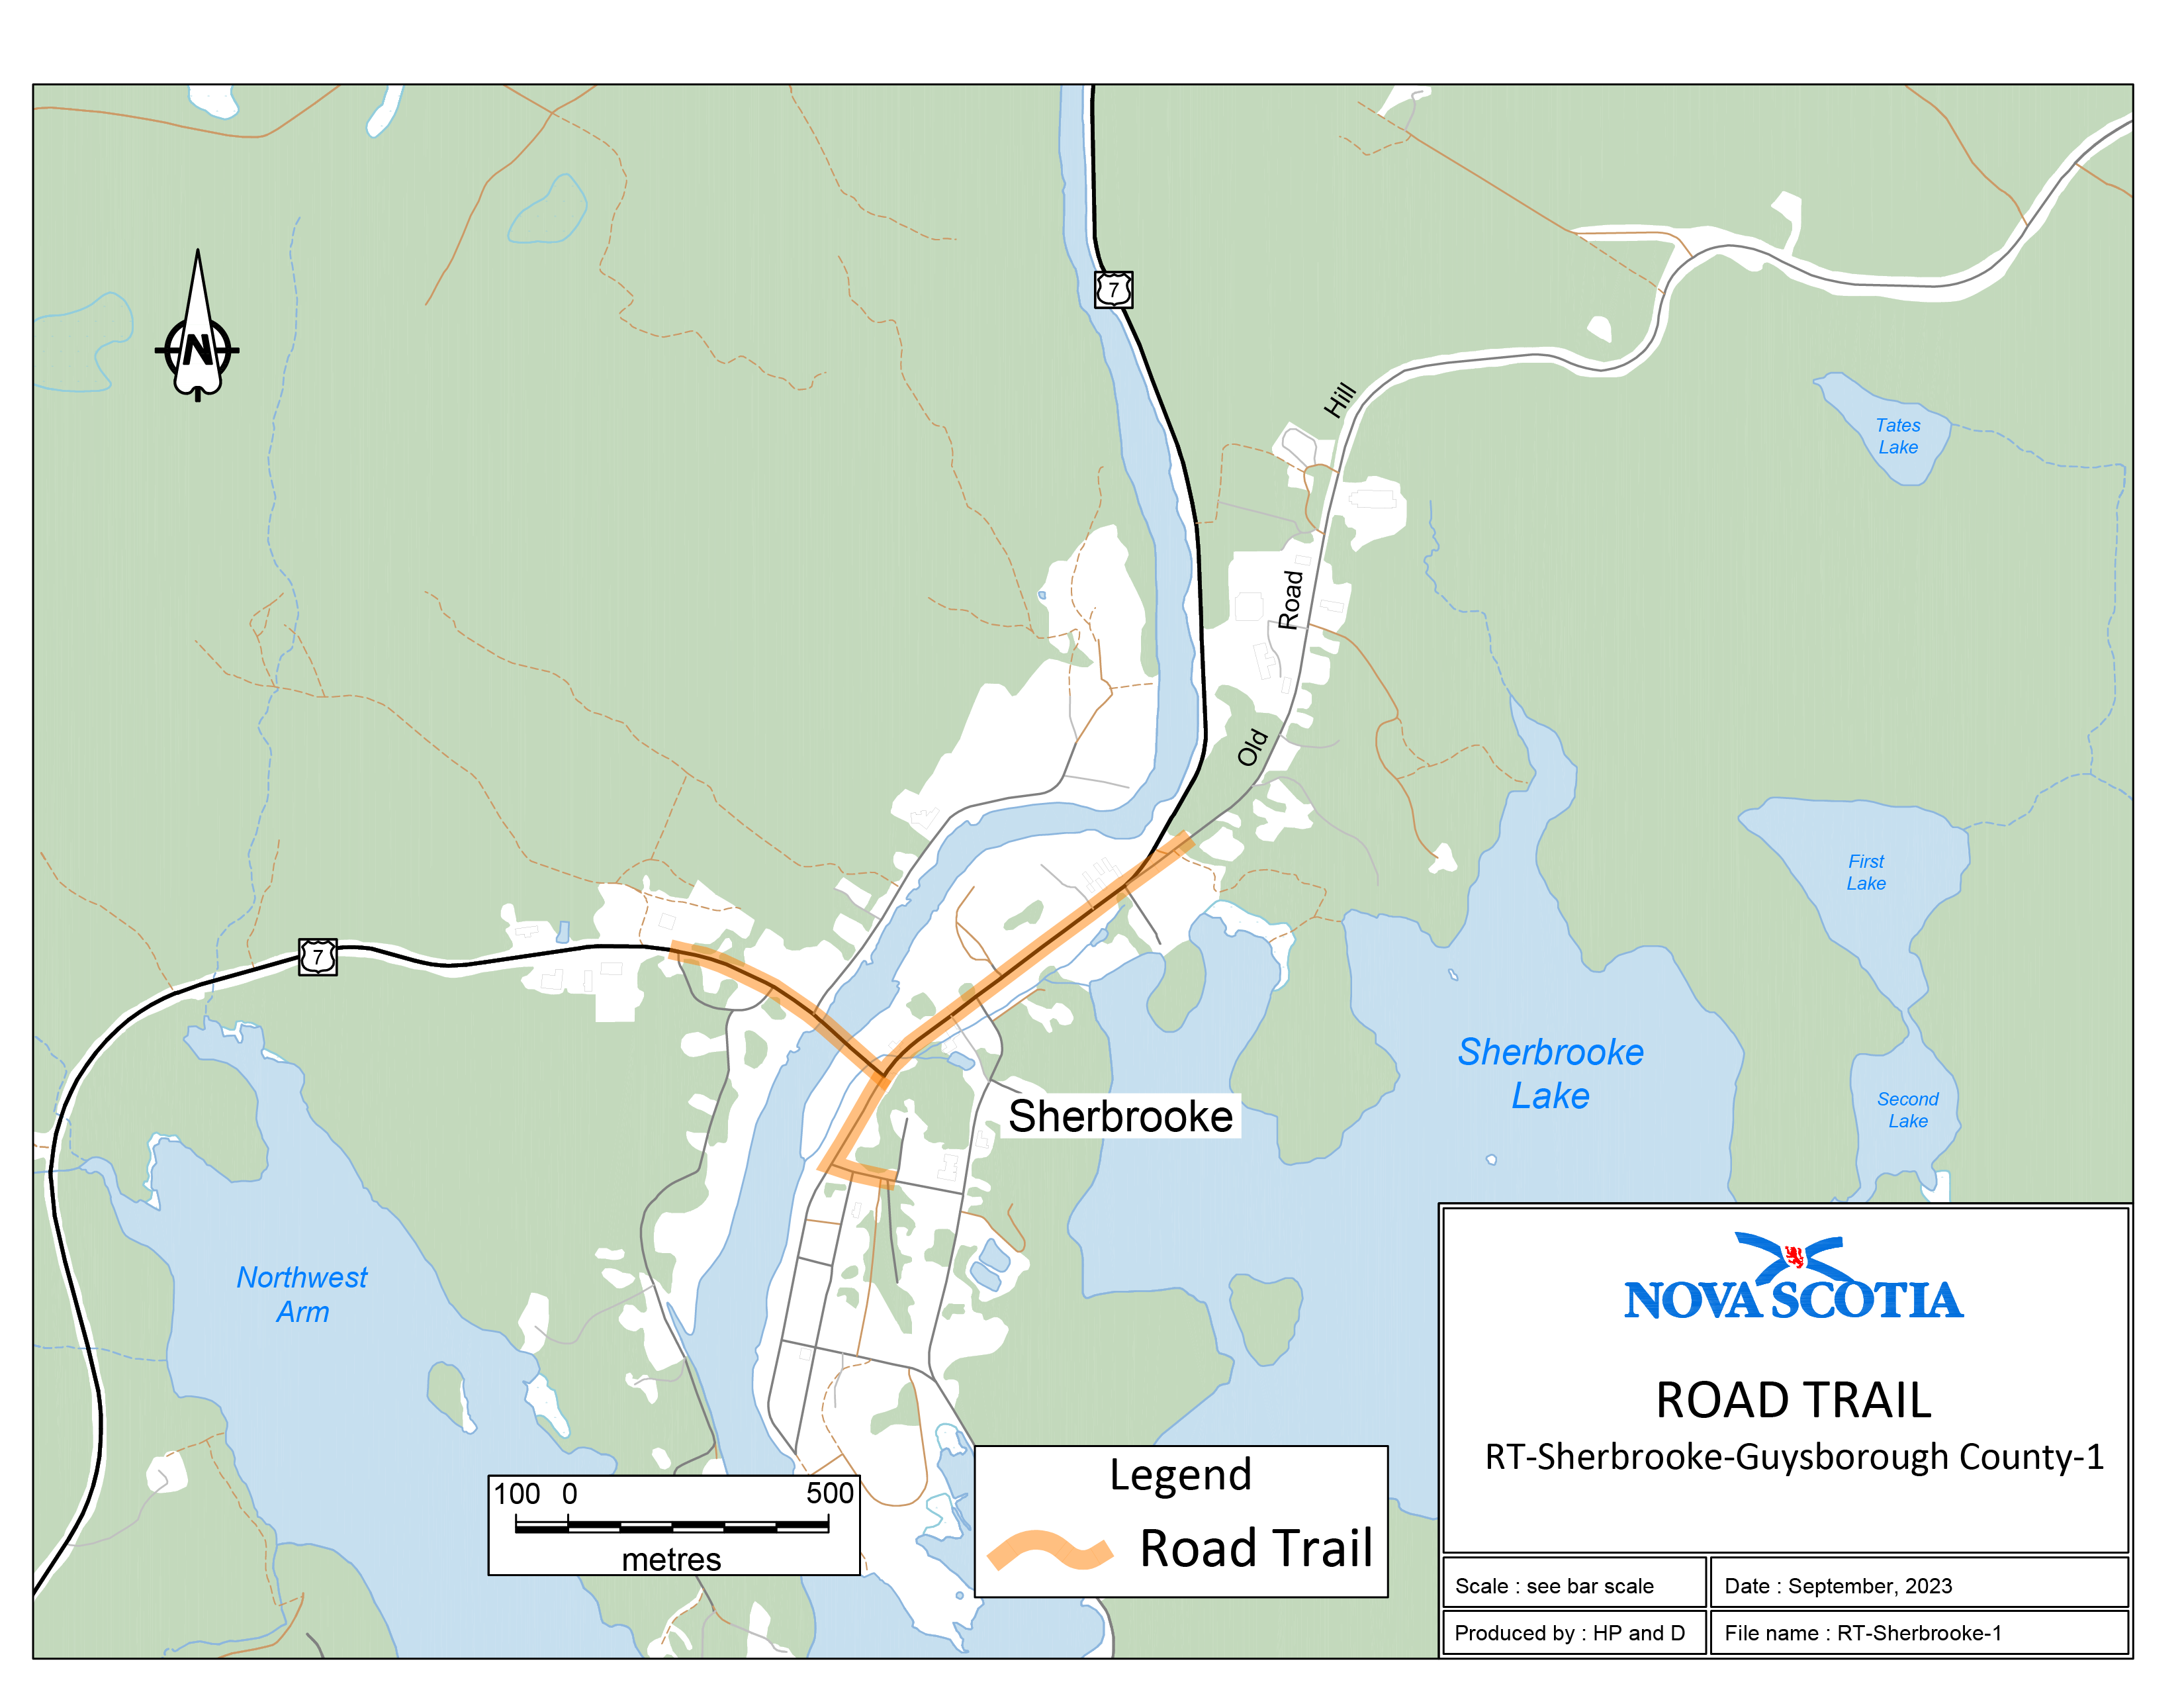 Graphic showing map of the Sherbrooke Road Trail